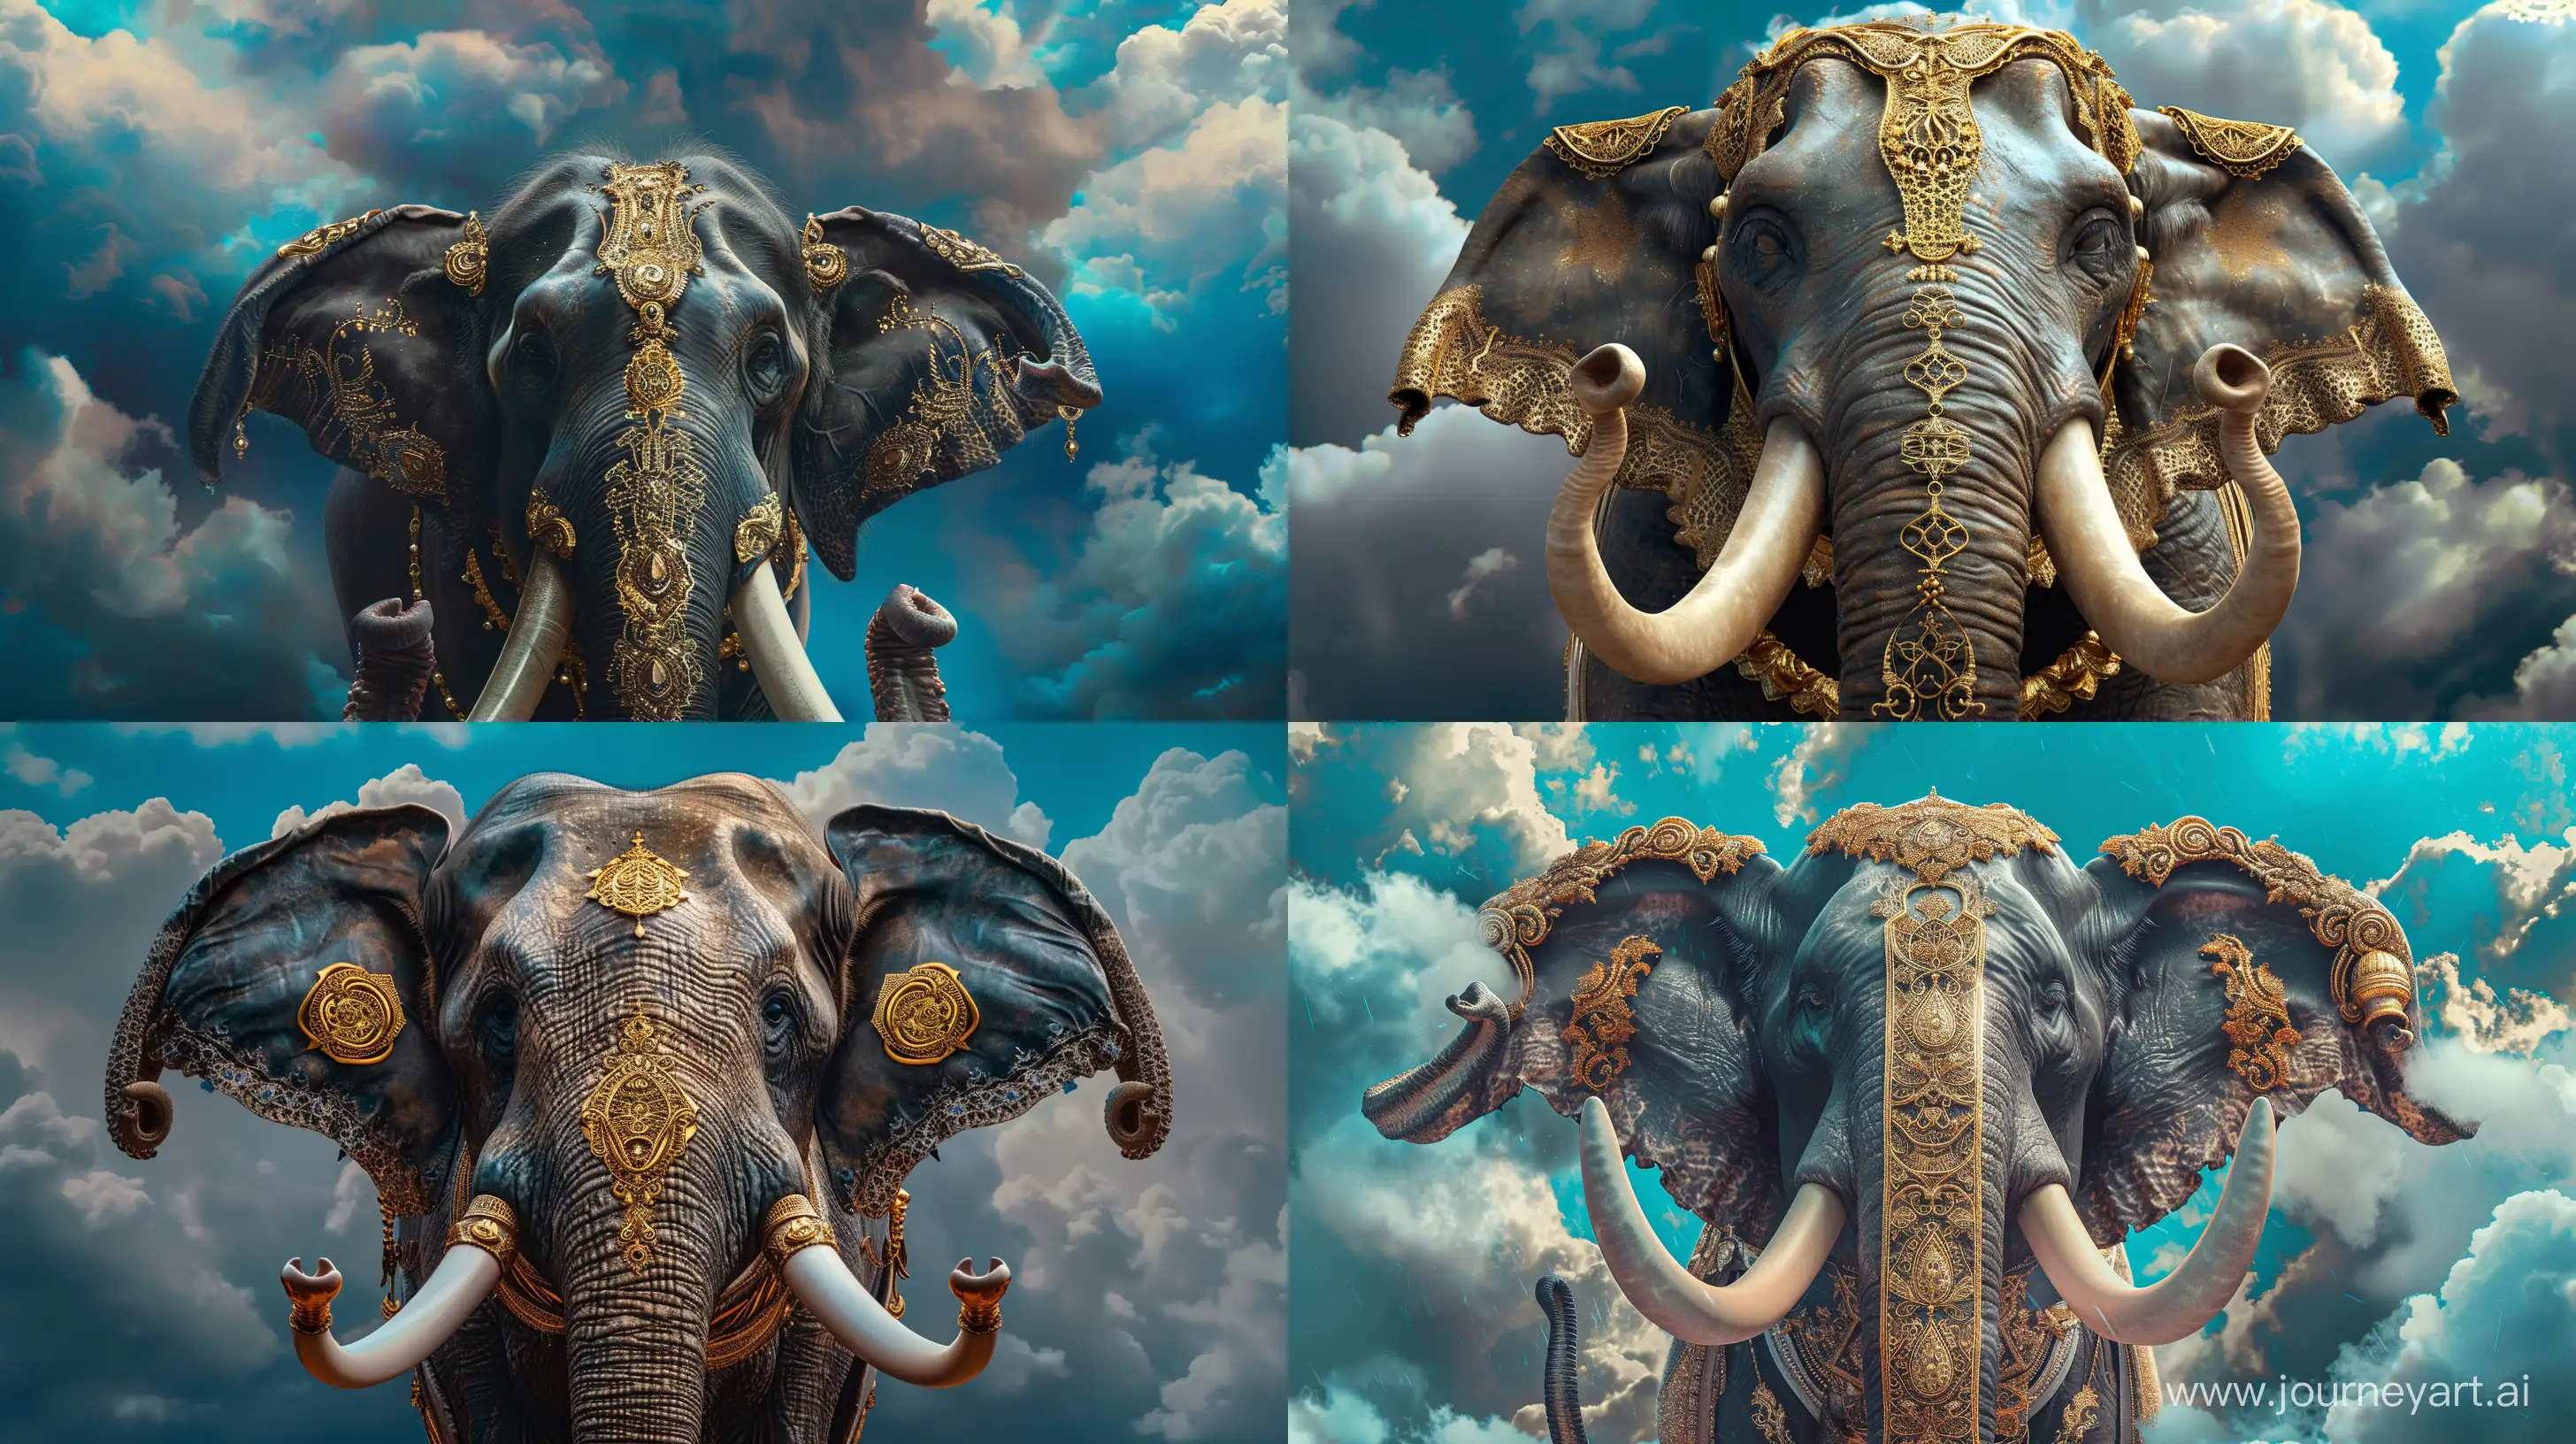 Divine-Elephant-with-Golden-Adornments-in-Cinematic-Ambiance